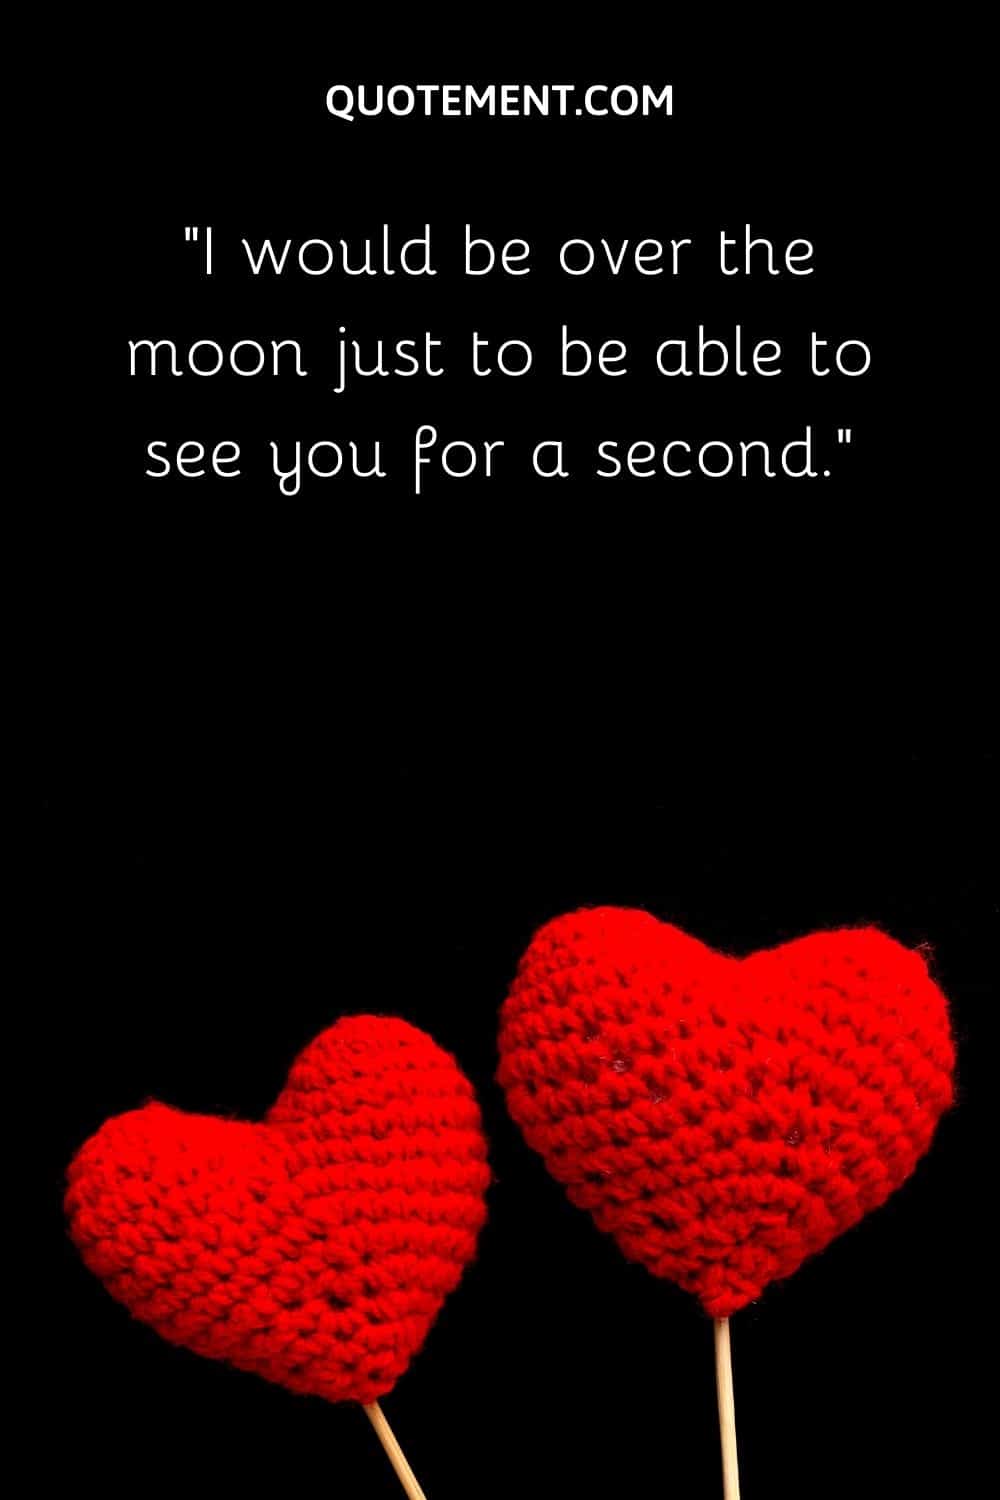 I would be over the moon just to be able to see you for a second.